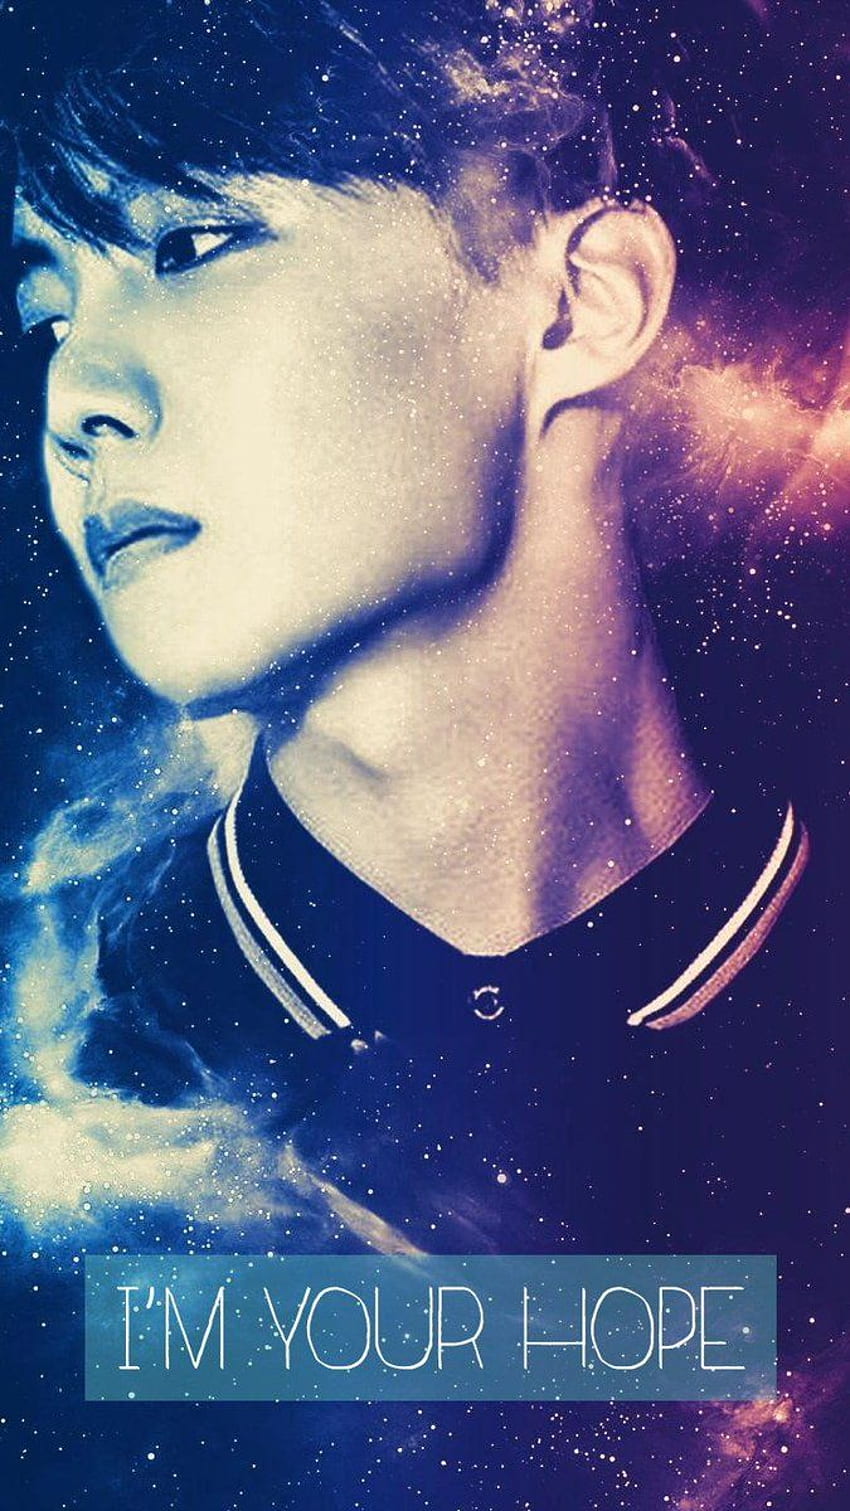 JHOPE created by me. Make sure to : give credit if you, BTS Jhope HD phone wallpaper